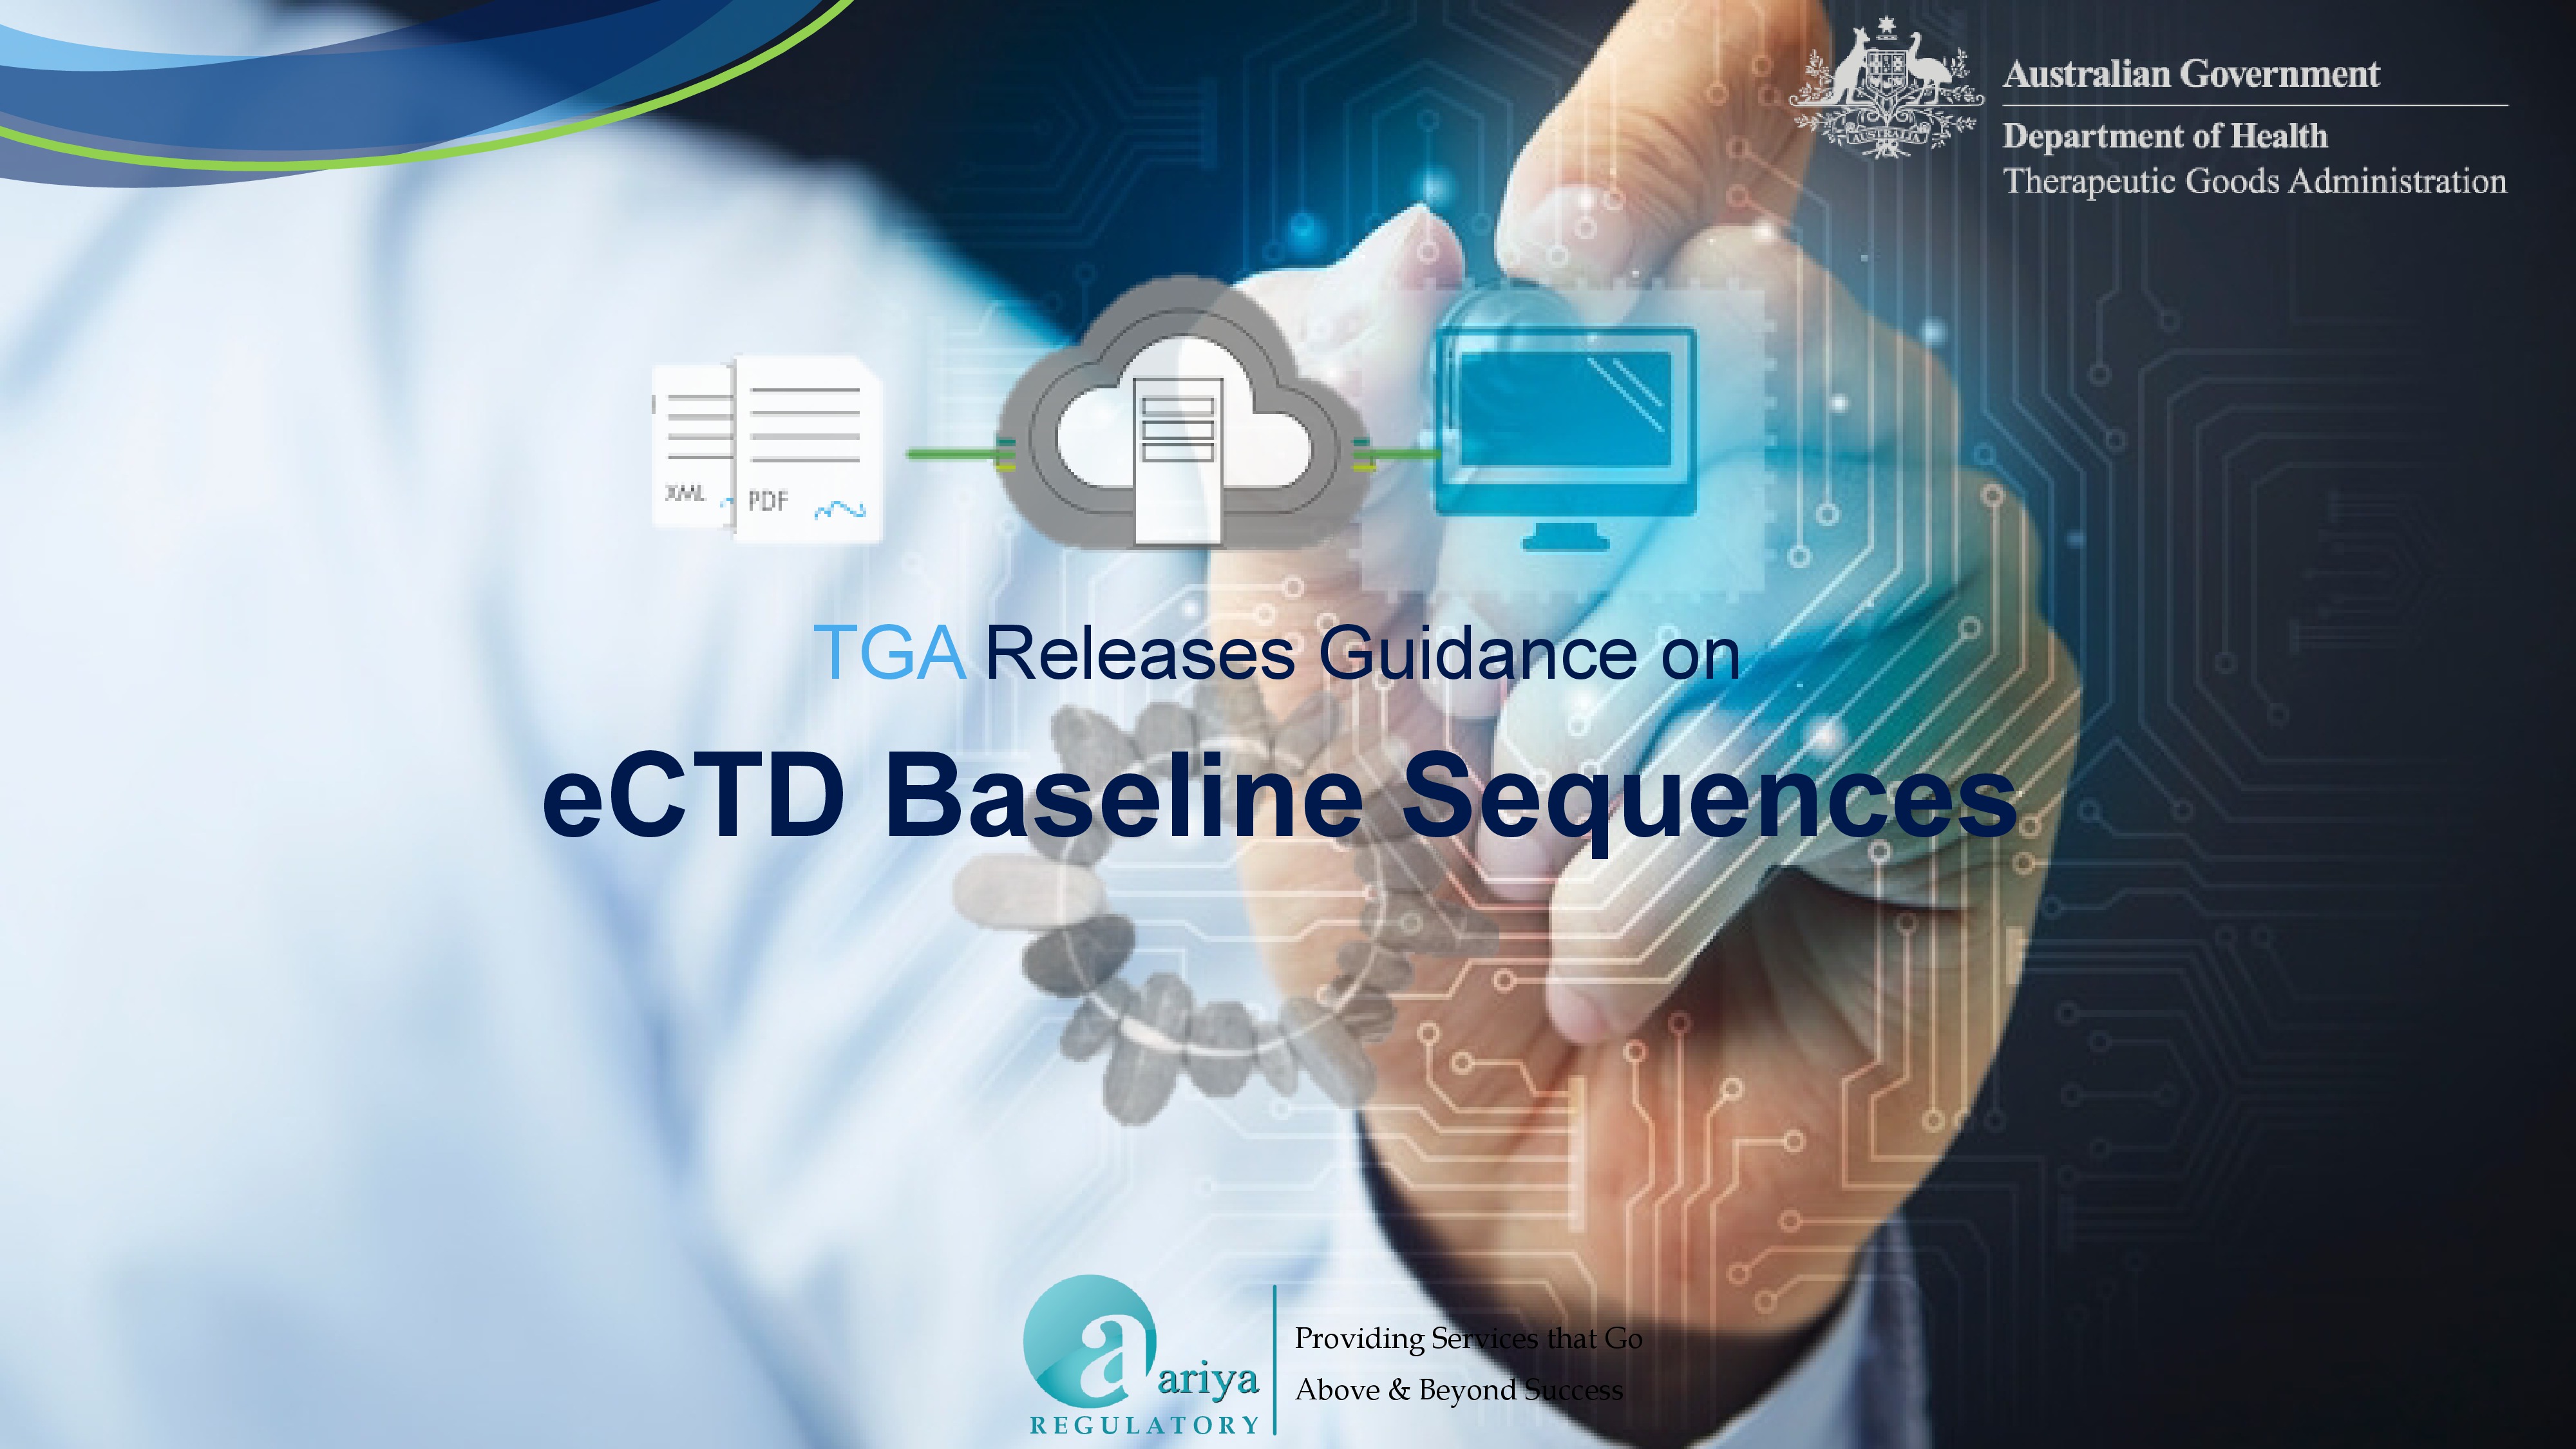 TGA Issues Guidance on eCTD Baseline Sequences